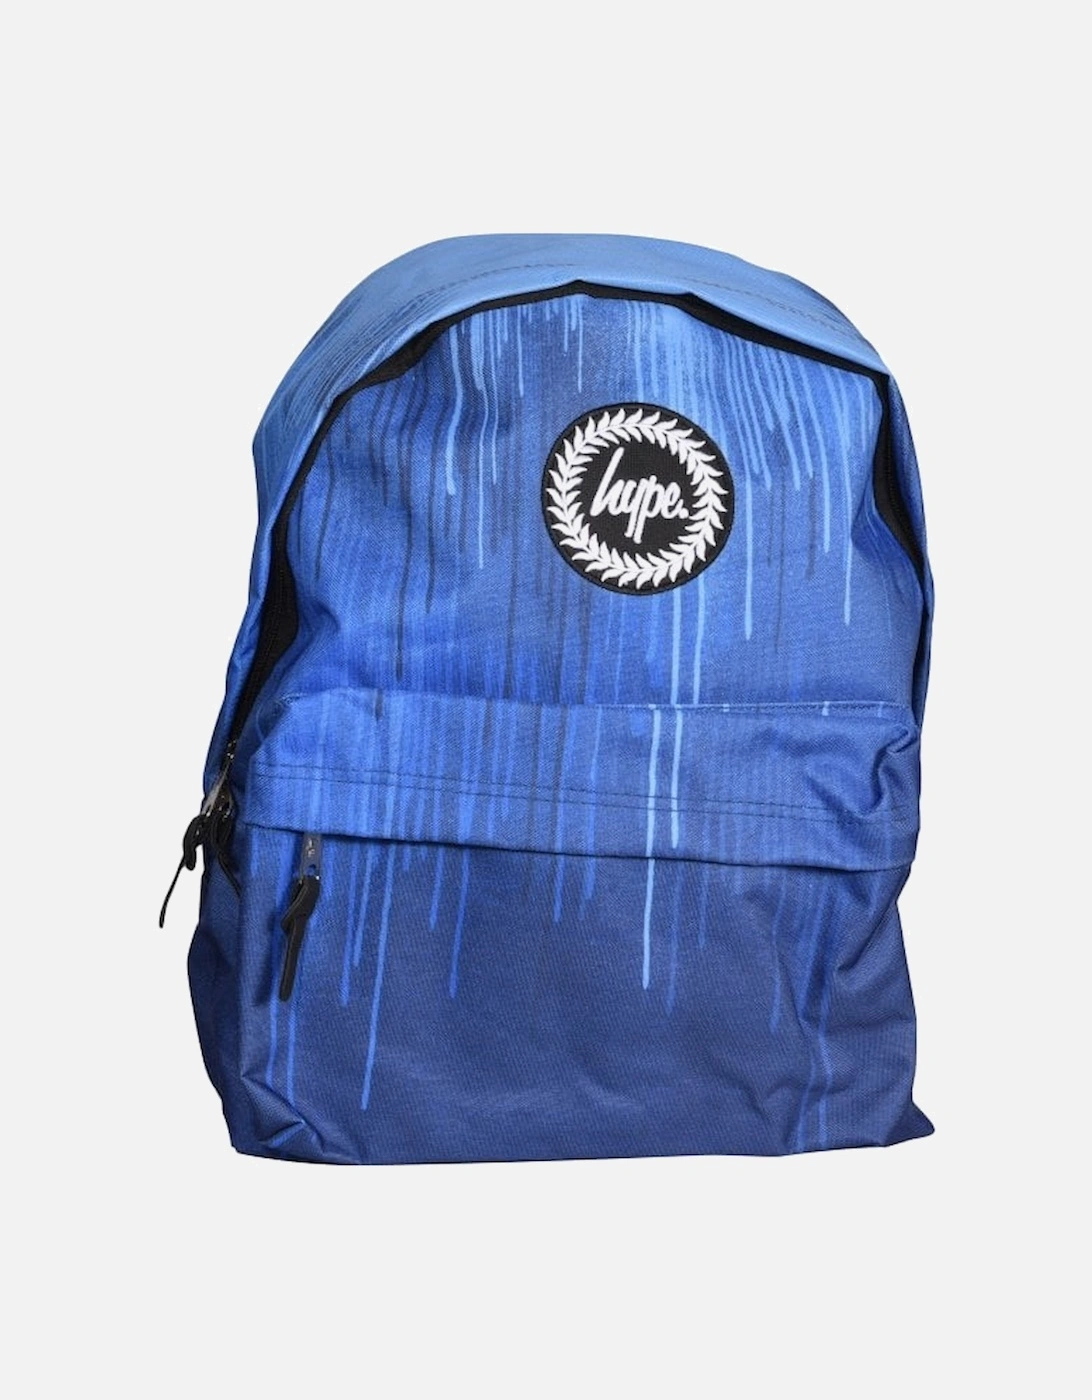 Paint Drips Backpack, Blue, 12 of 11